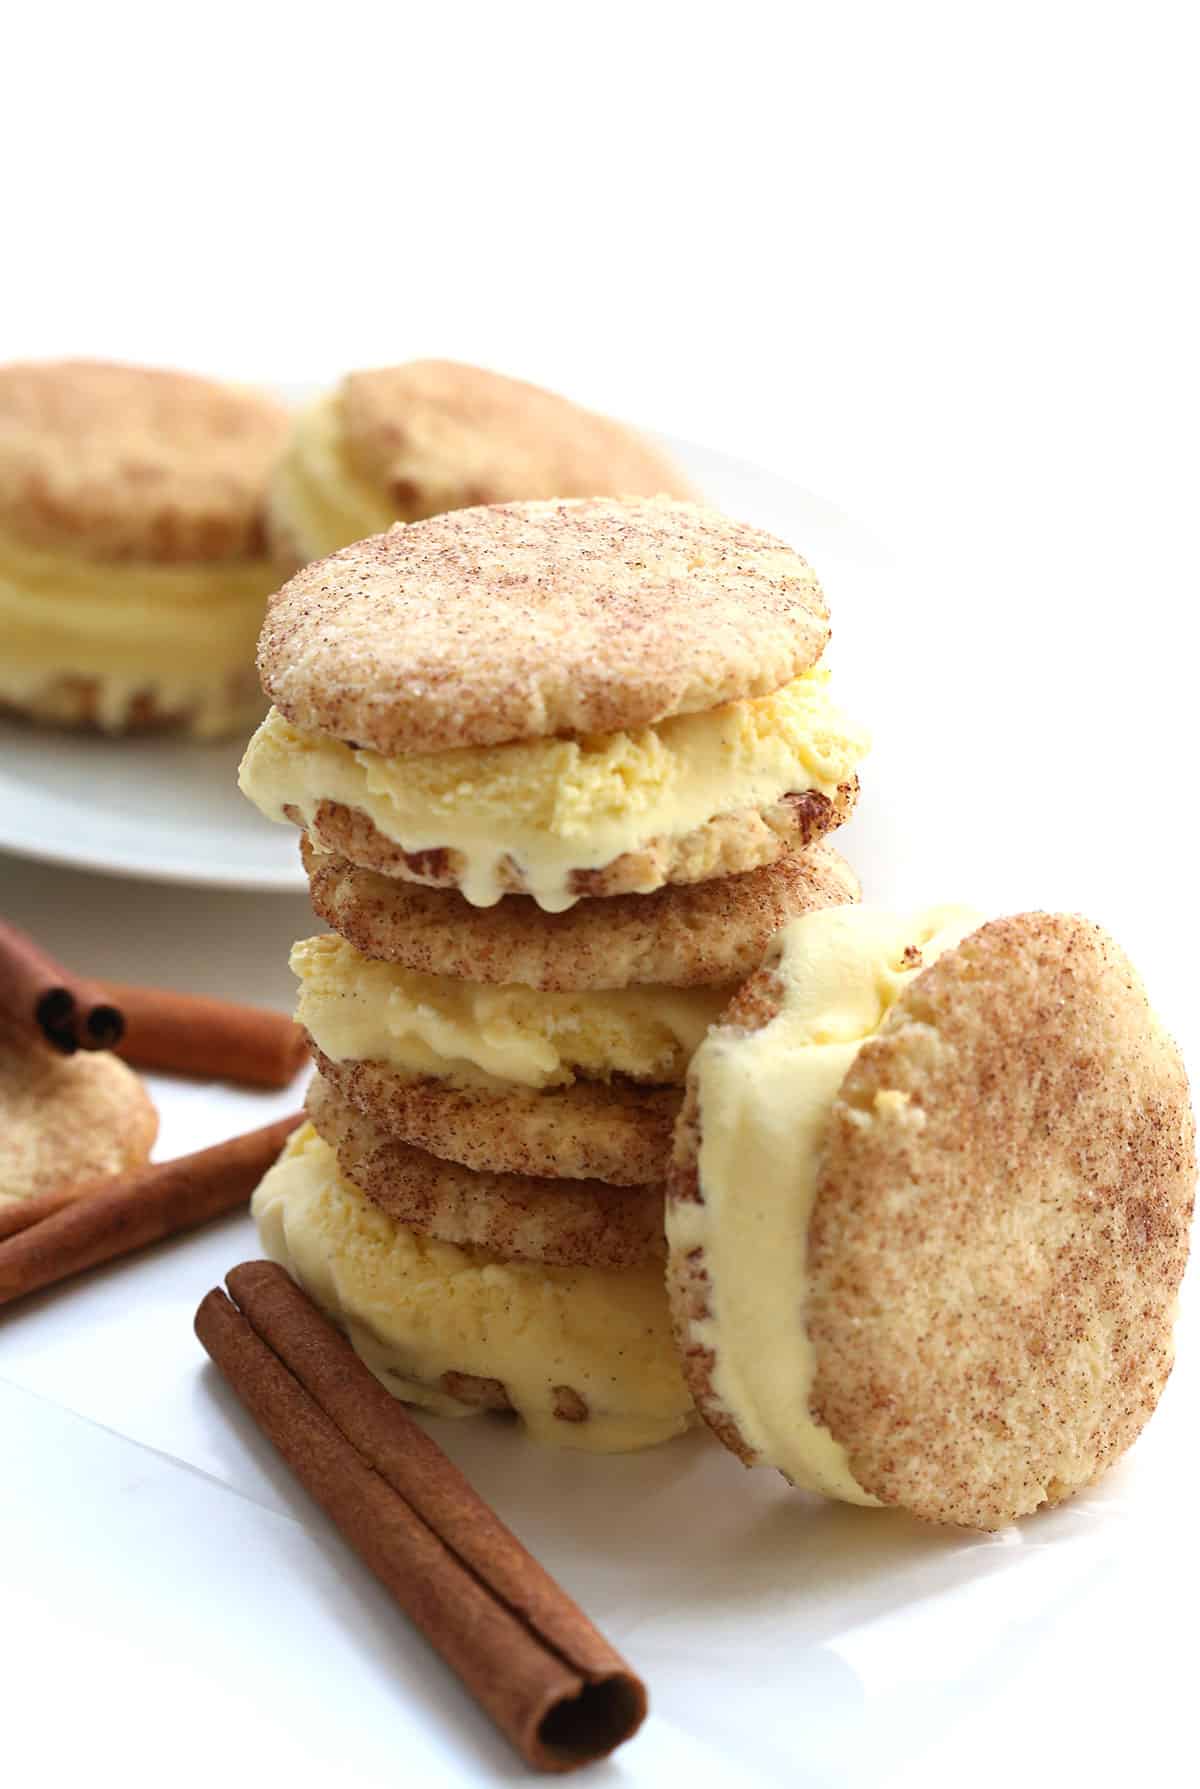 A stack of keto ice cream sandwiches with sticks of cinnamon